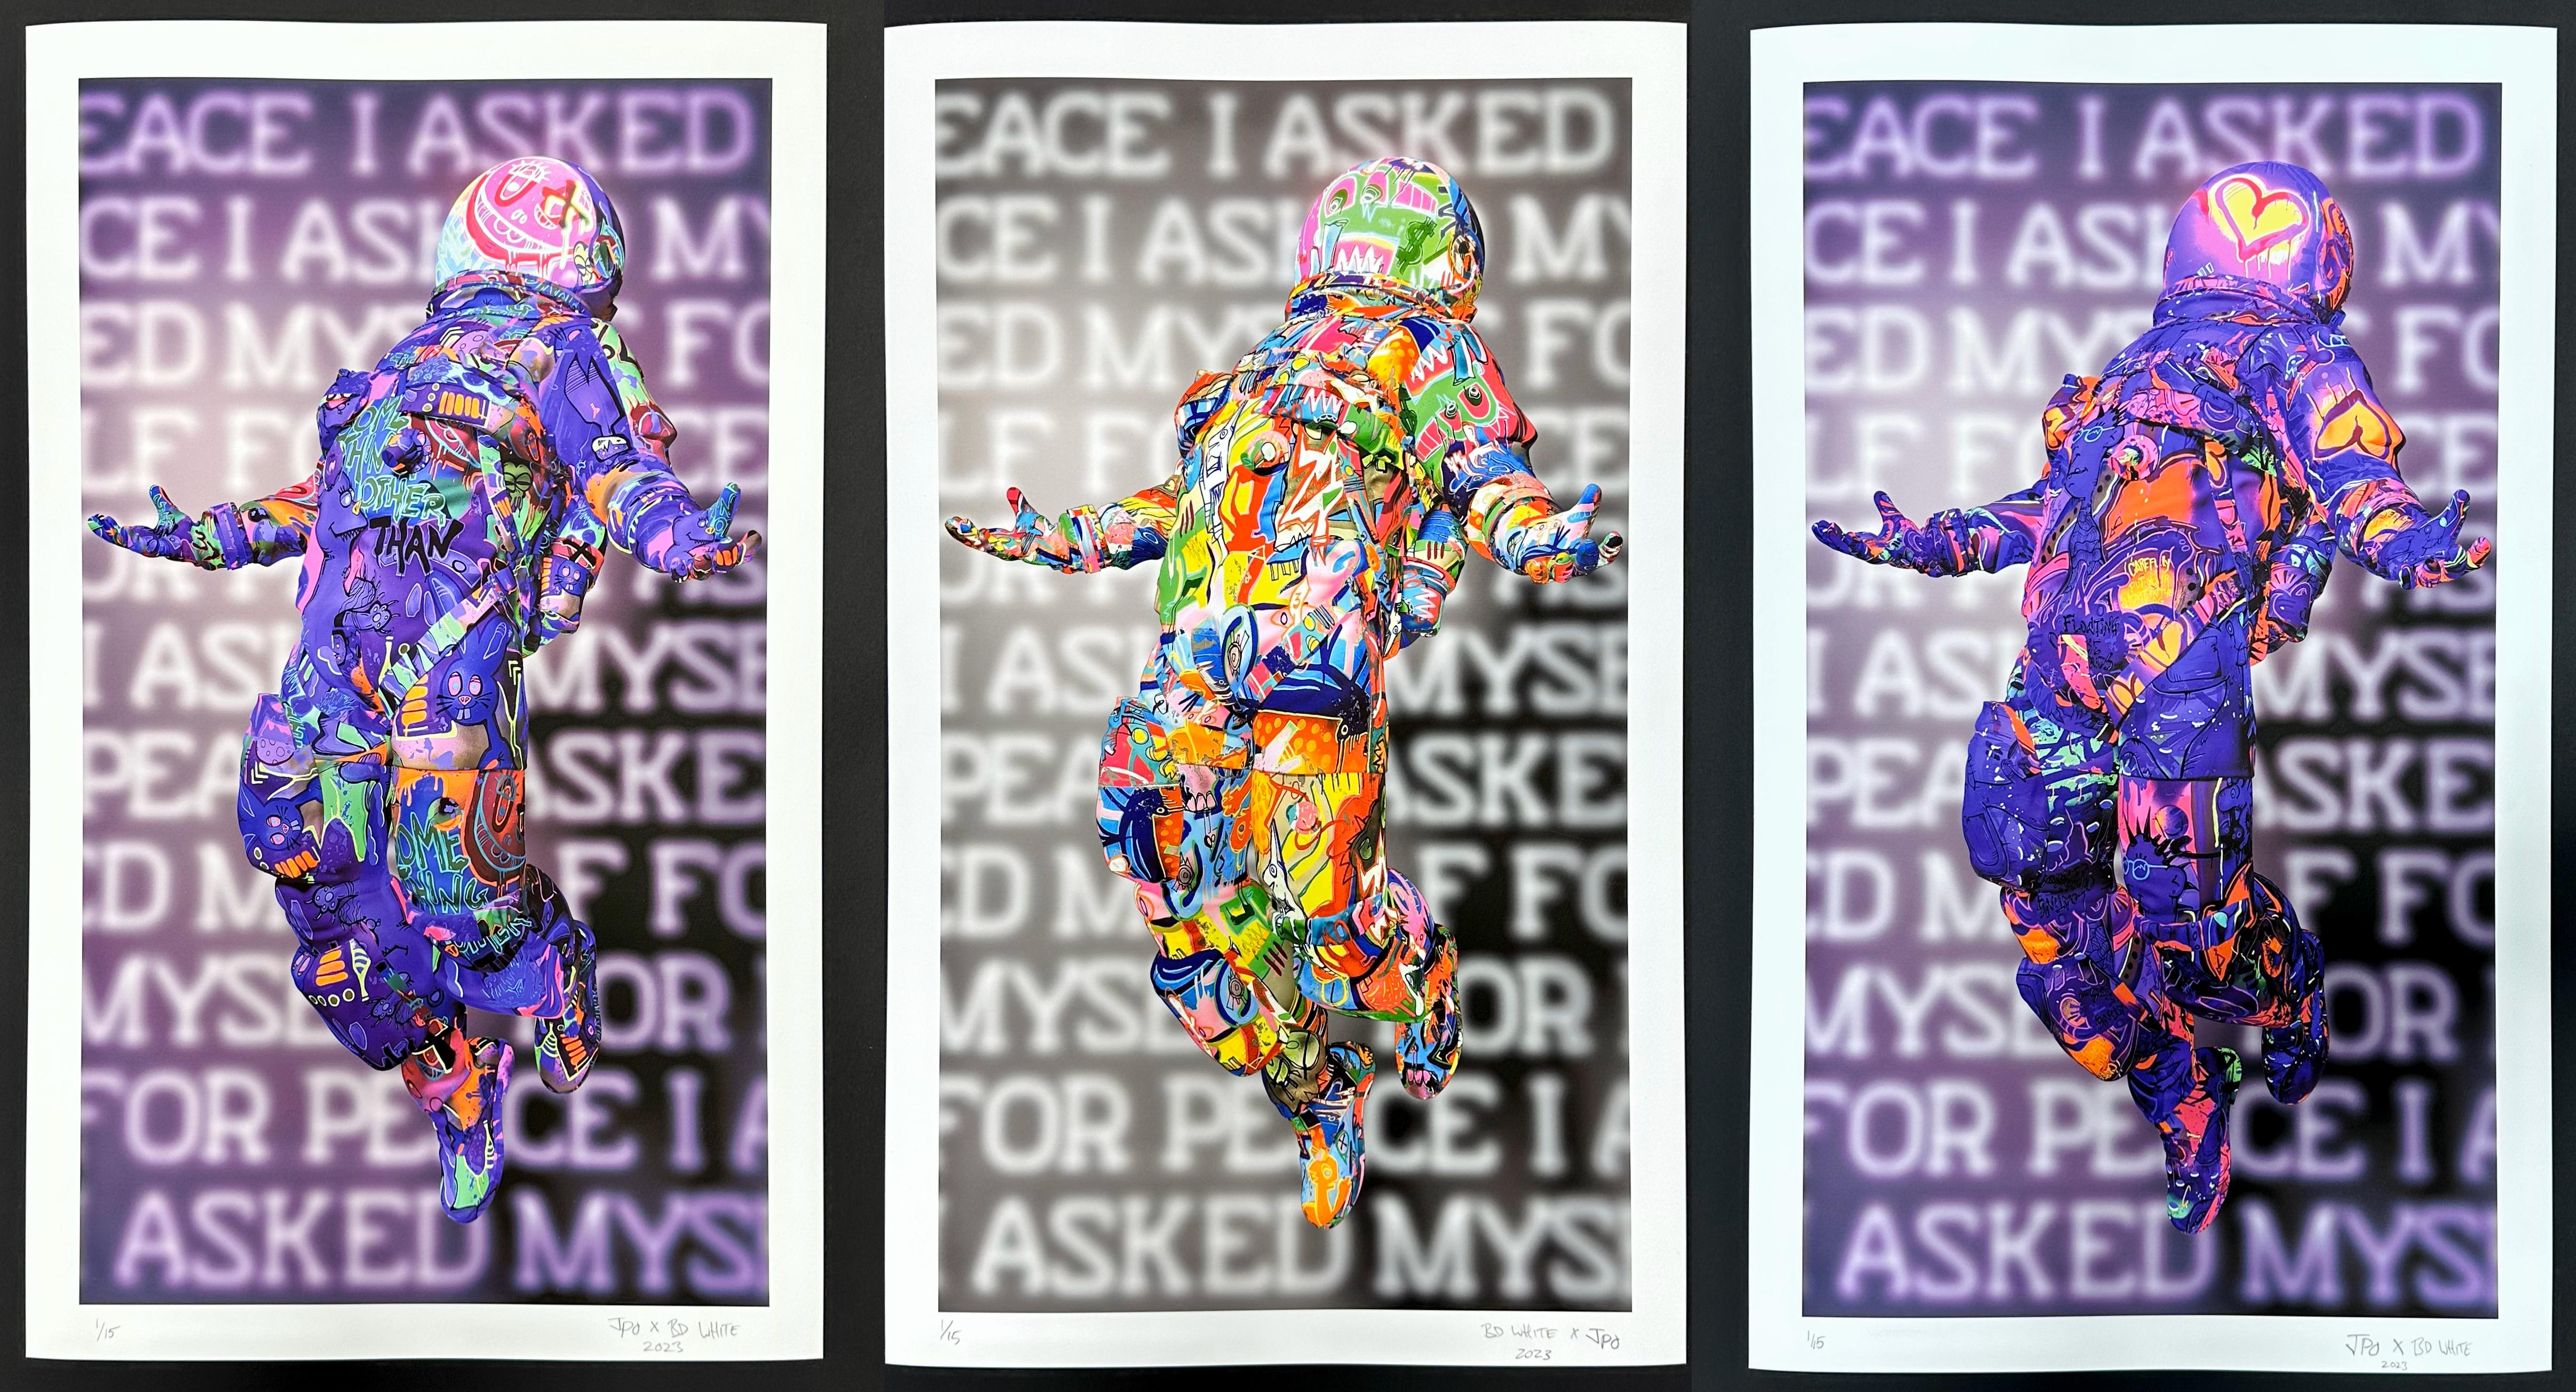 Matching Number Set (3 prints)

Collaboration print with BD White & JPO

Archival Pigment print

24 x 14.5 inches

Limited Edition out of 15

Signed by BD White & JPO